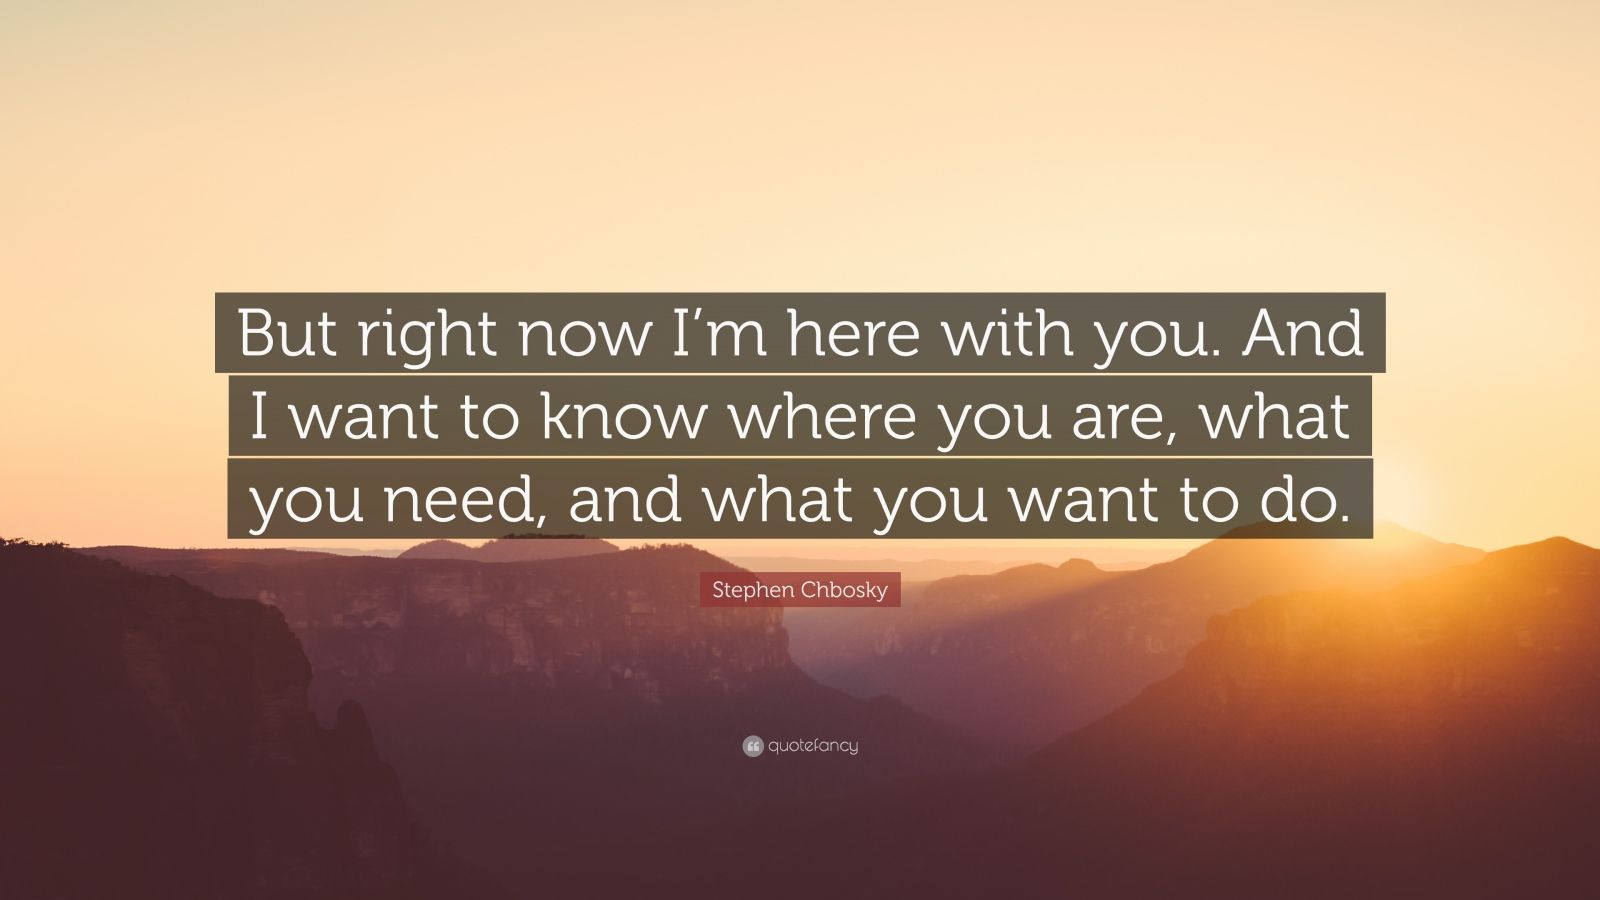 stephen chbosky quote: "but right now i"m here with you.